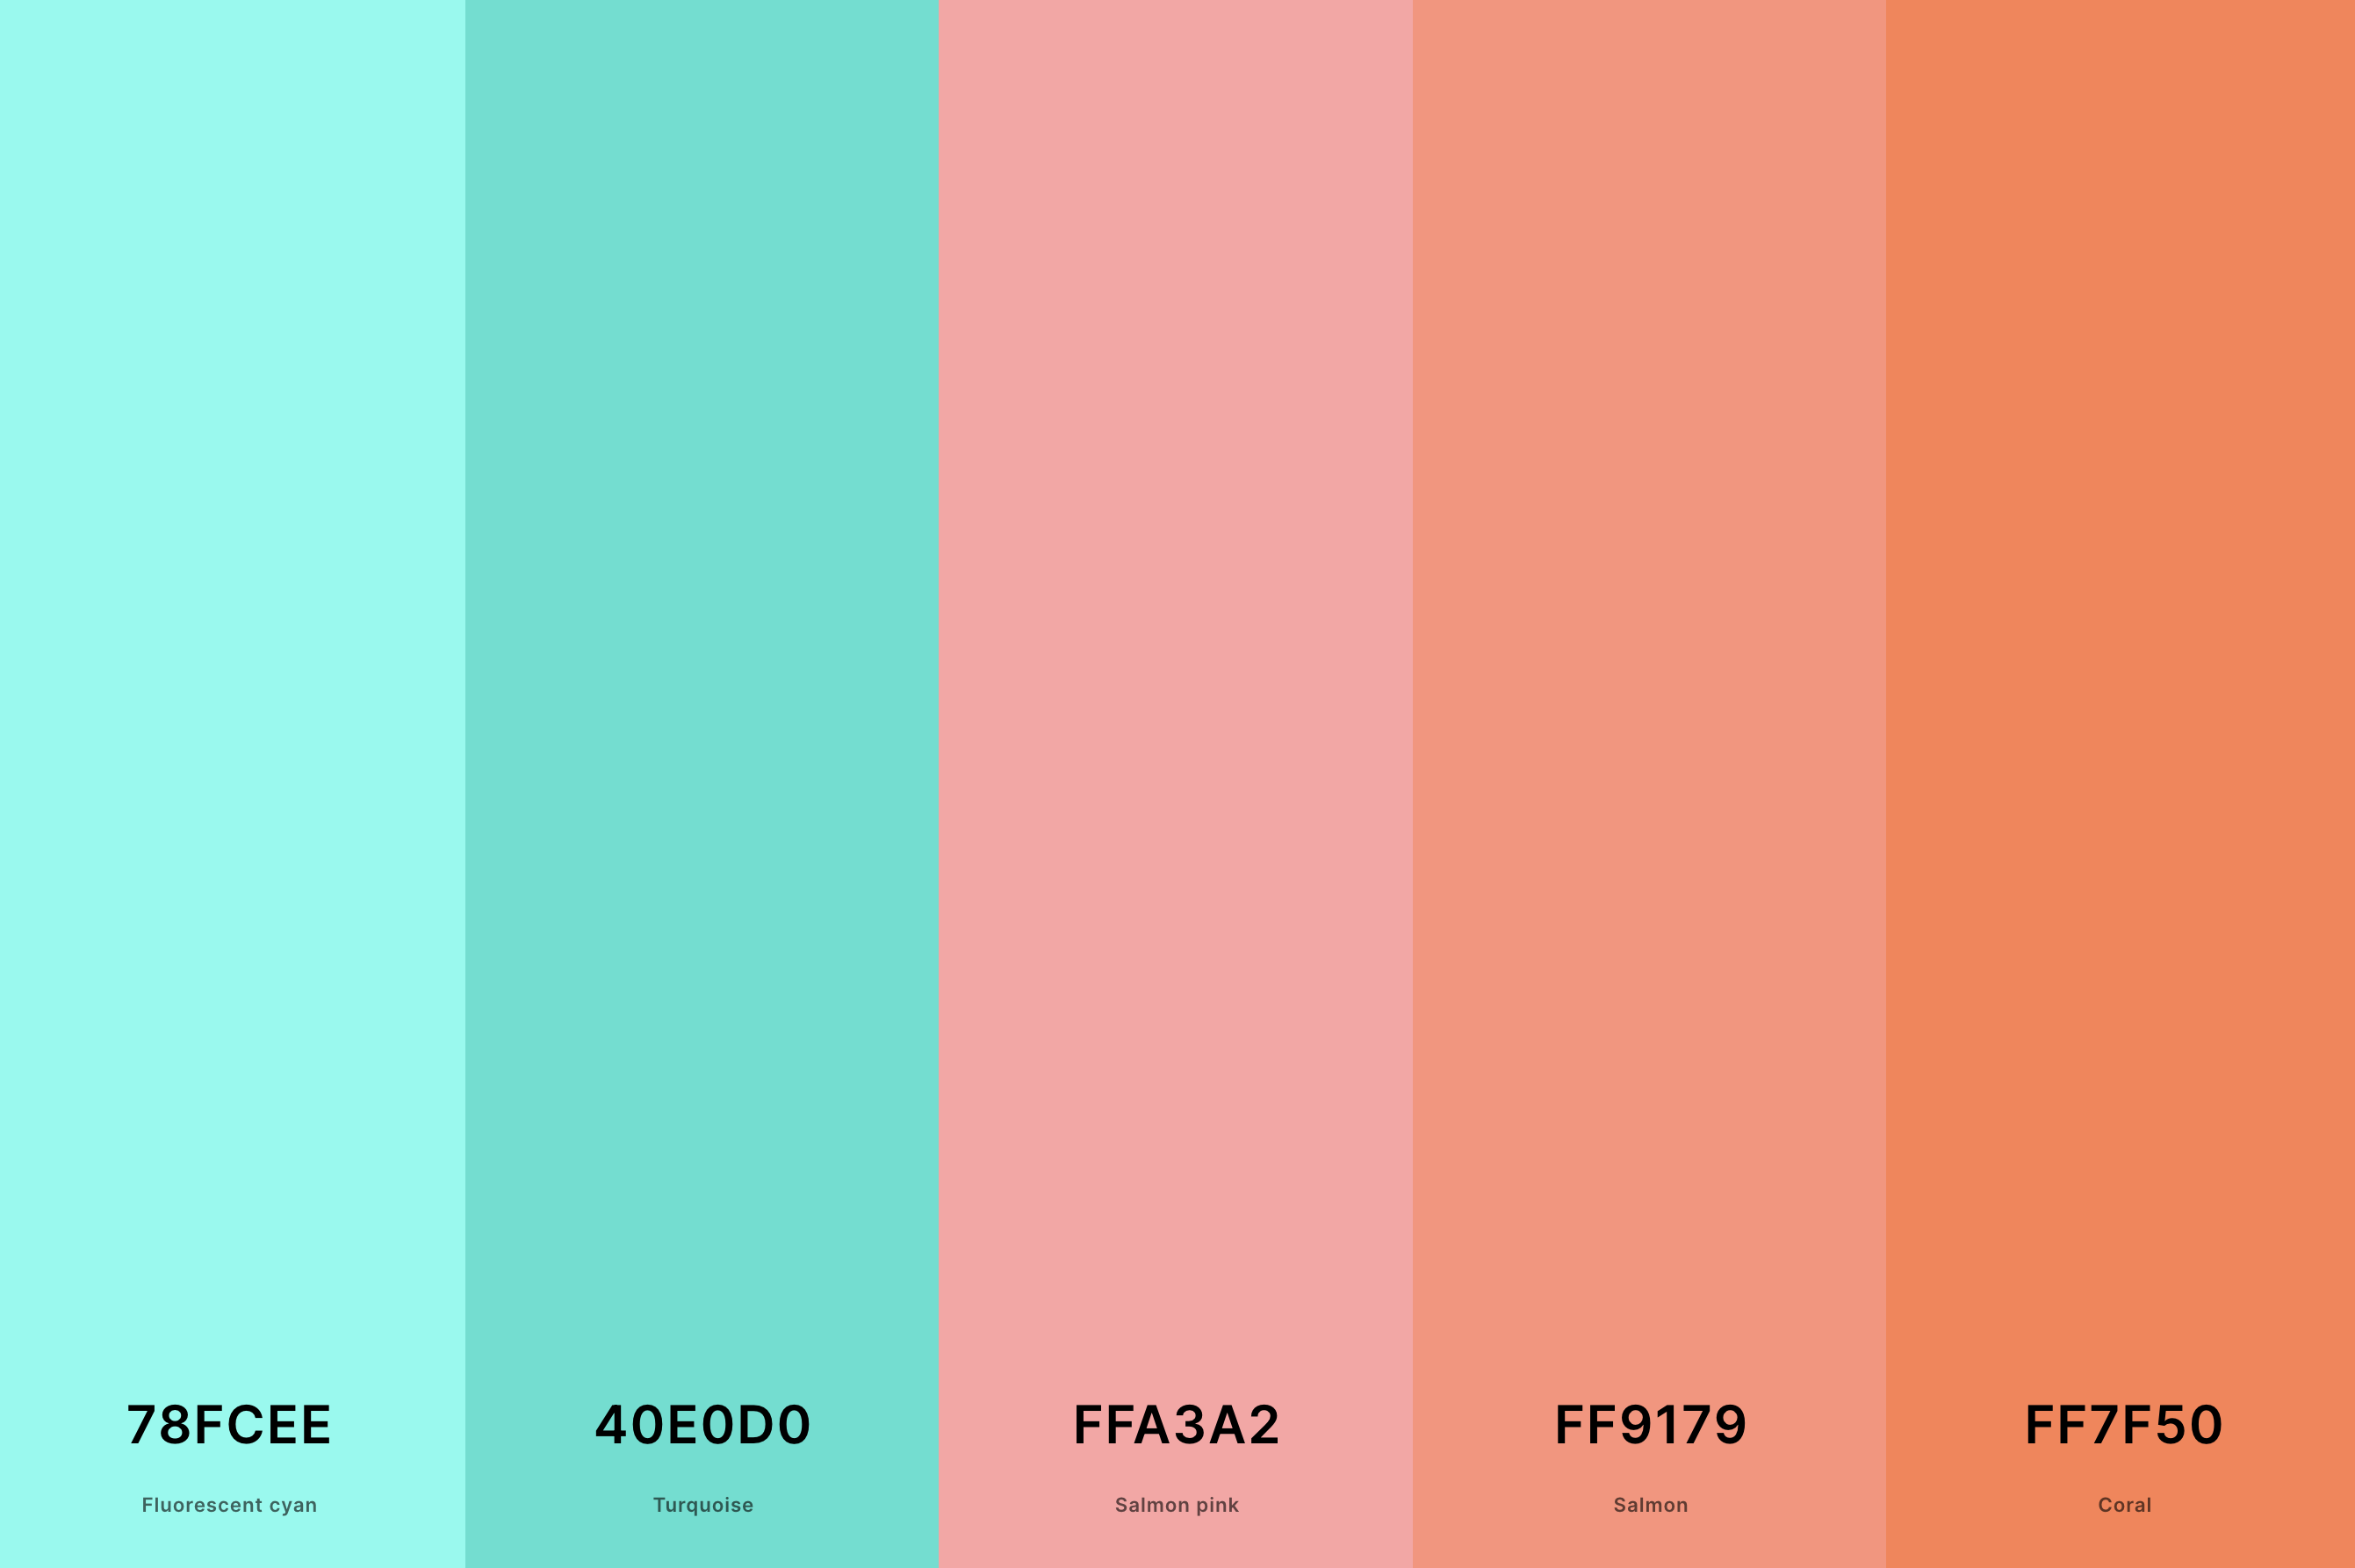 9. Coral And Turquoise Color Palette Color Palette with Fluorescent Cyan (Hex #78FCEE) + Turquoise (Hex #40E0D0) + Salmon Pink (Hex #FFA3A2) + Salmon (Hex #FF9179) + Coral (Hex #FF7F50) Color Palette with Hex Codes